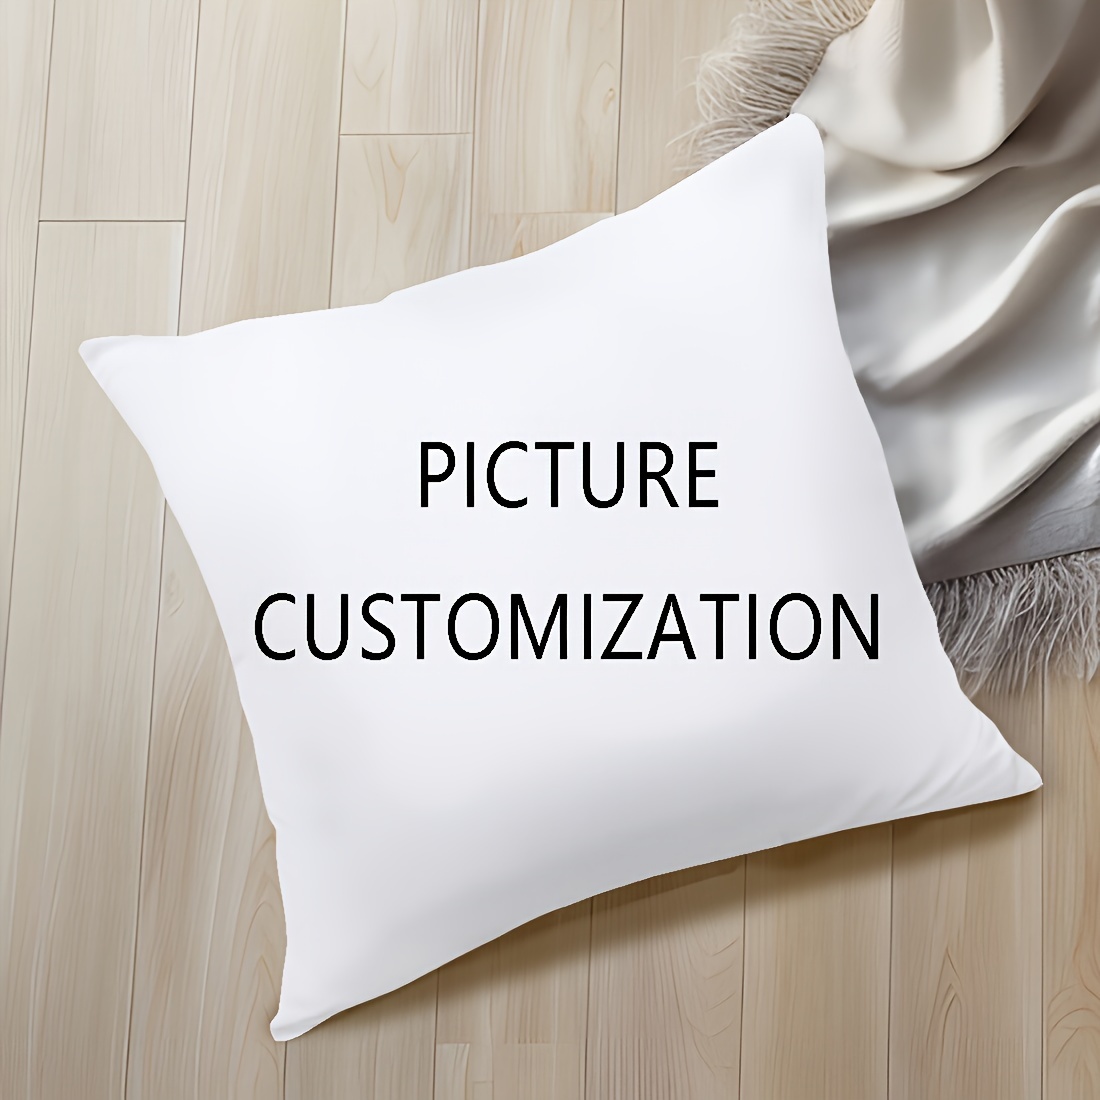 

1pc, Customized Single-sided Peach Skin Velvet Pillowcase With Customized Text Logo Pattern Printing For A Comfortable Home Pillowcase, Home Decor, Sofa Decor